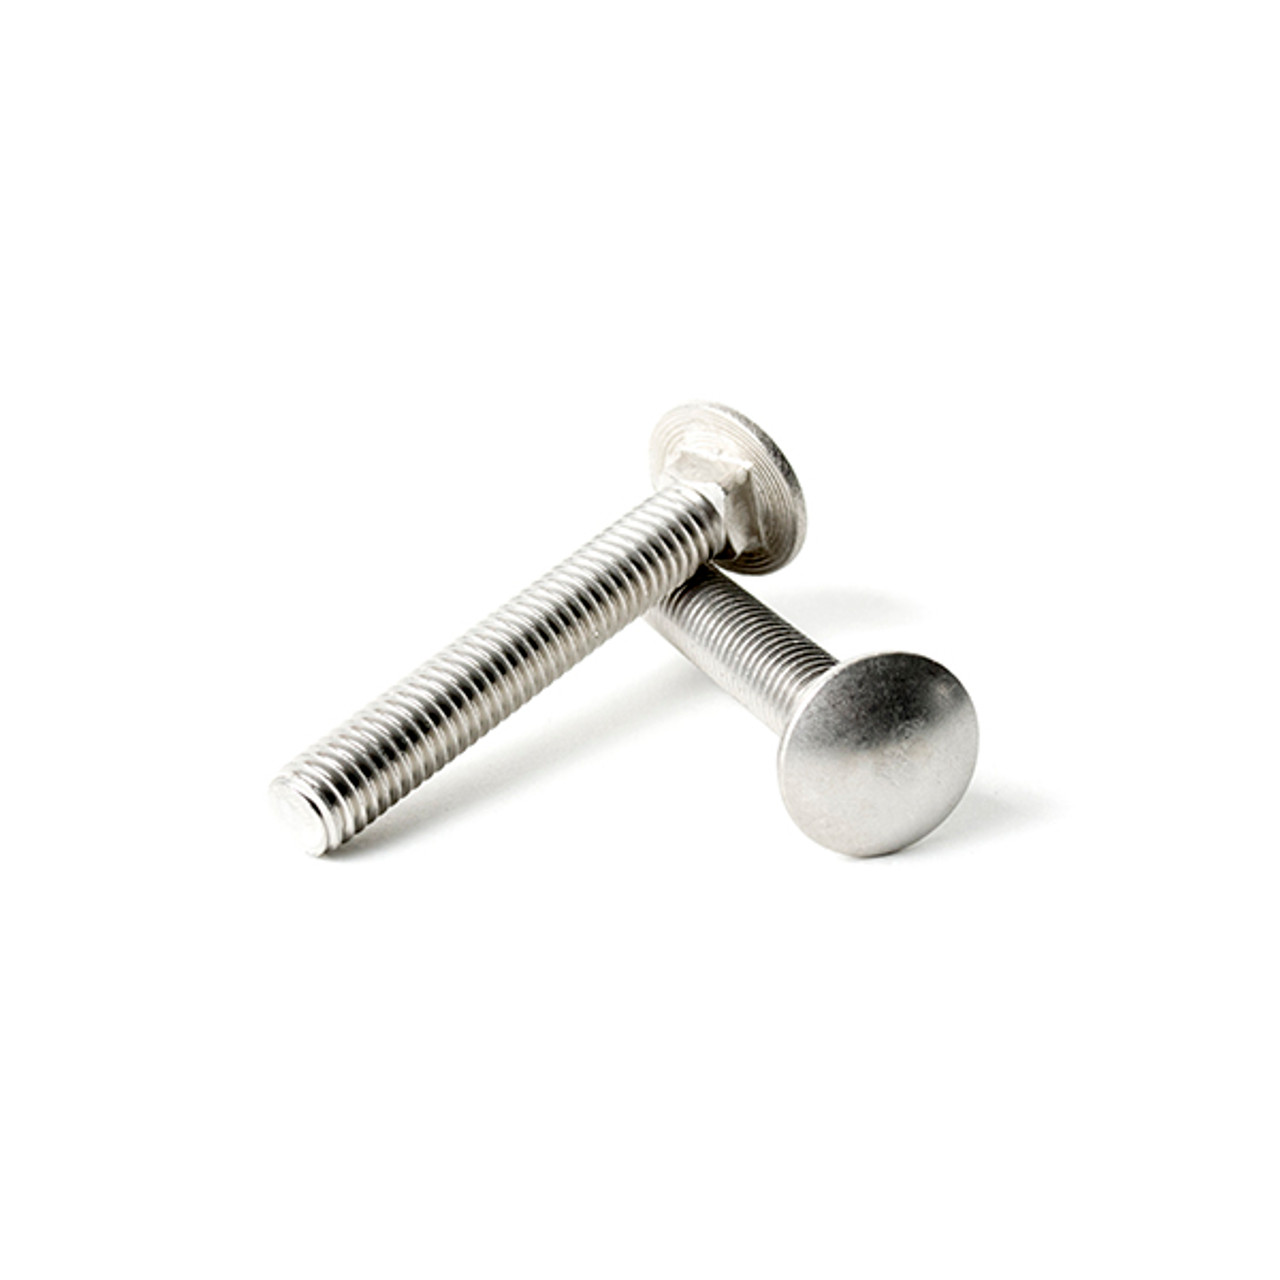 Stainless Steel Carriage Bolt 25-10/24 x 2-1/2 